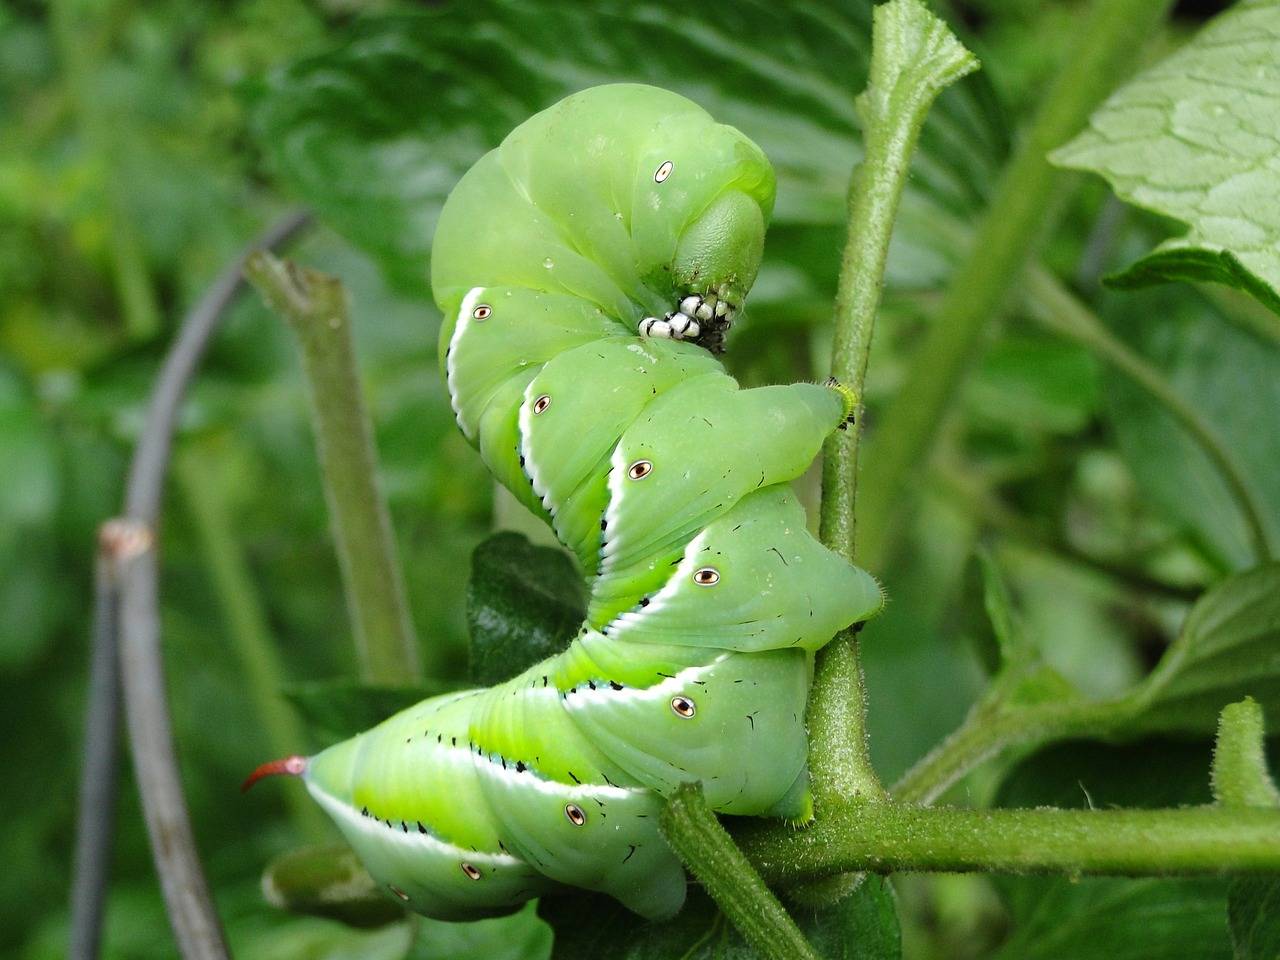 Keep garden pests like tomato hornworms away with natural pest control!